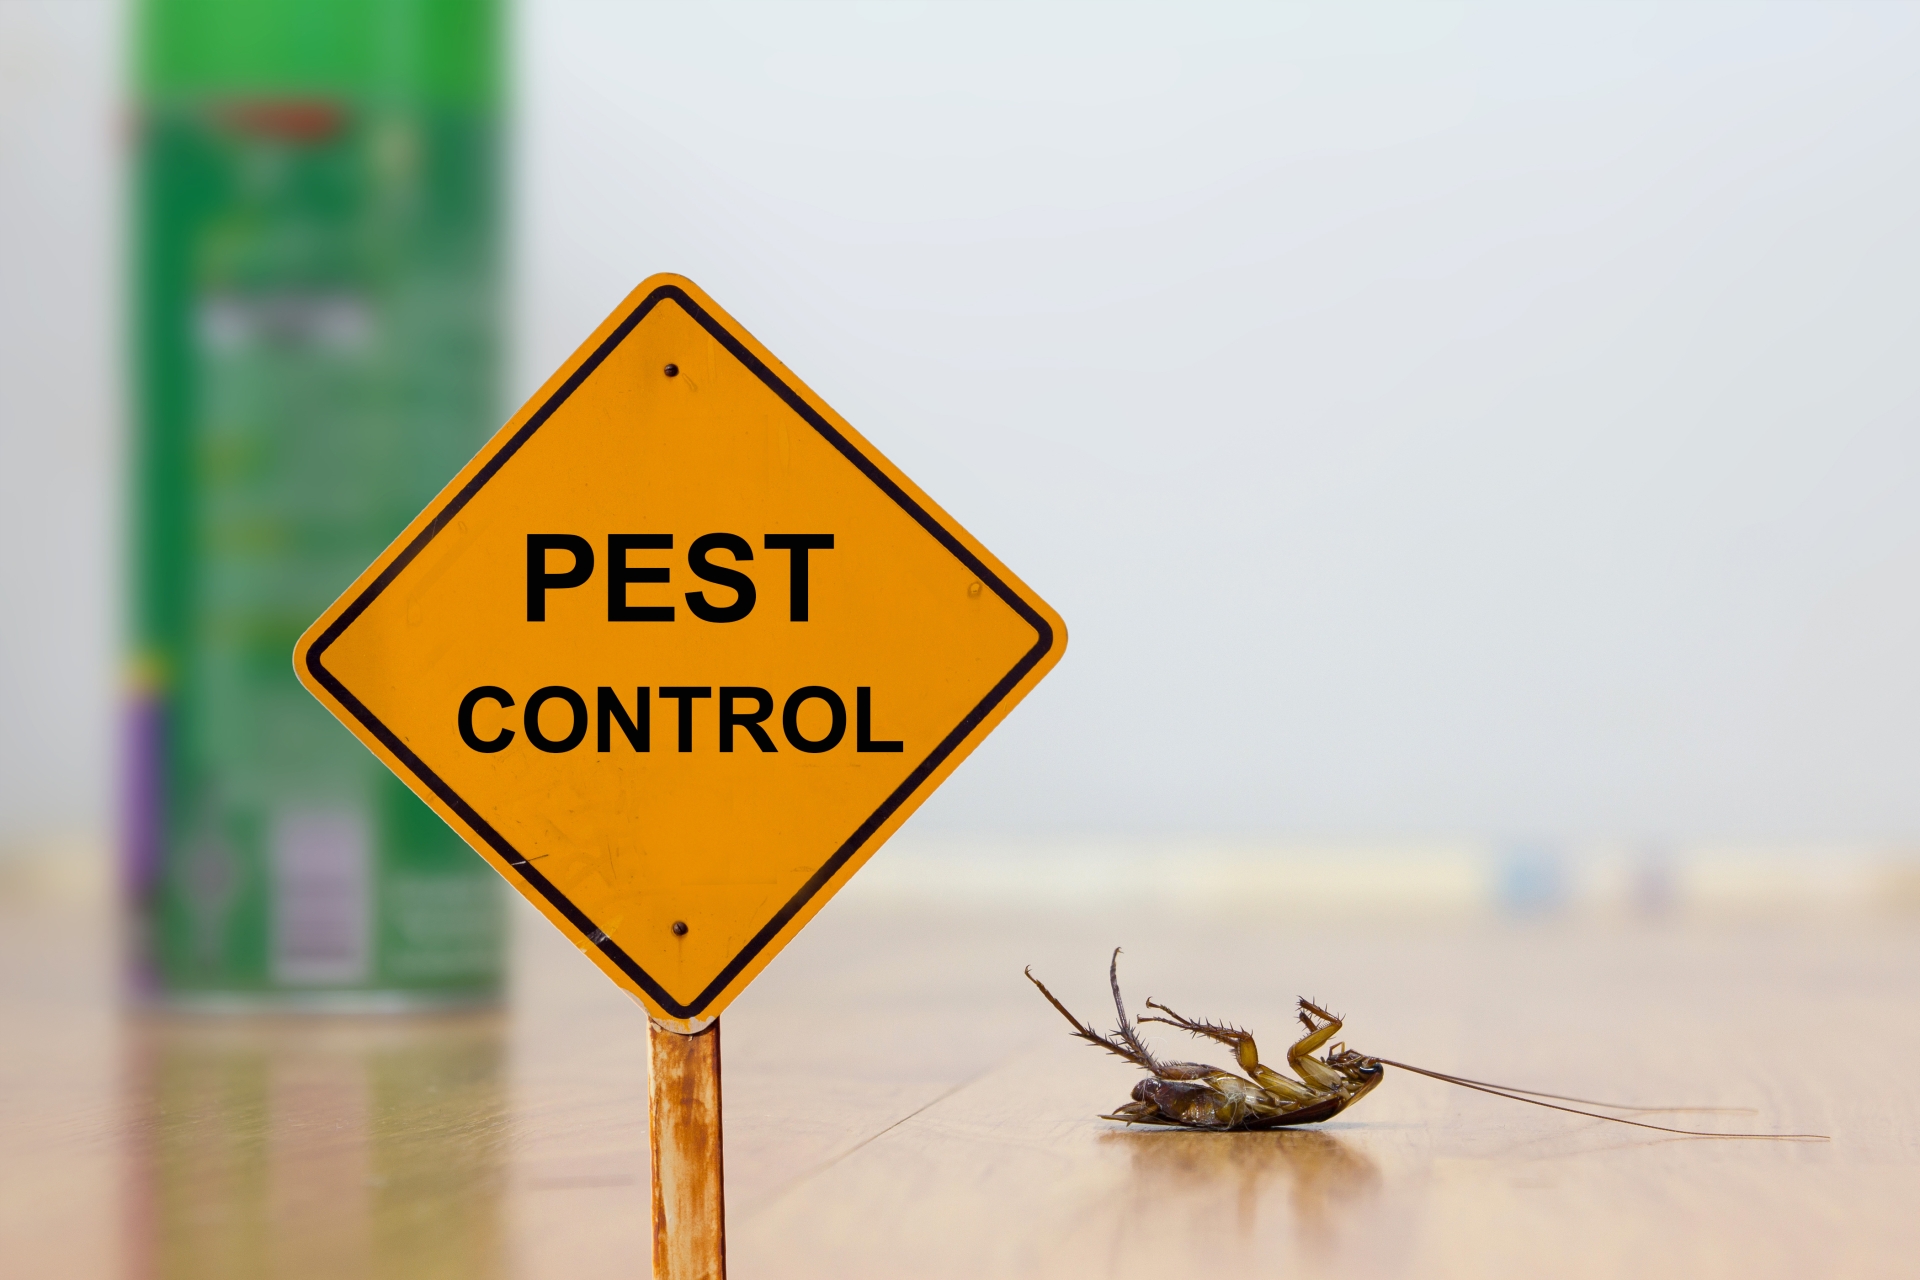 24 Hour Pest Control, Pest Control in Esher, Claygate, KT10. Call Now 020 8166 9746